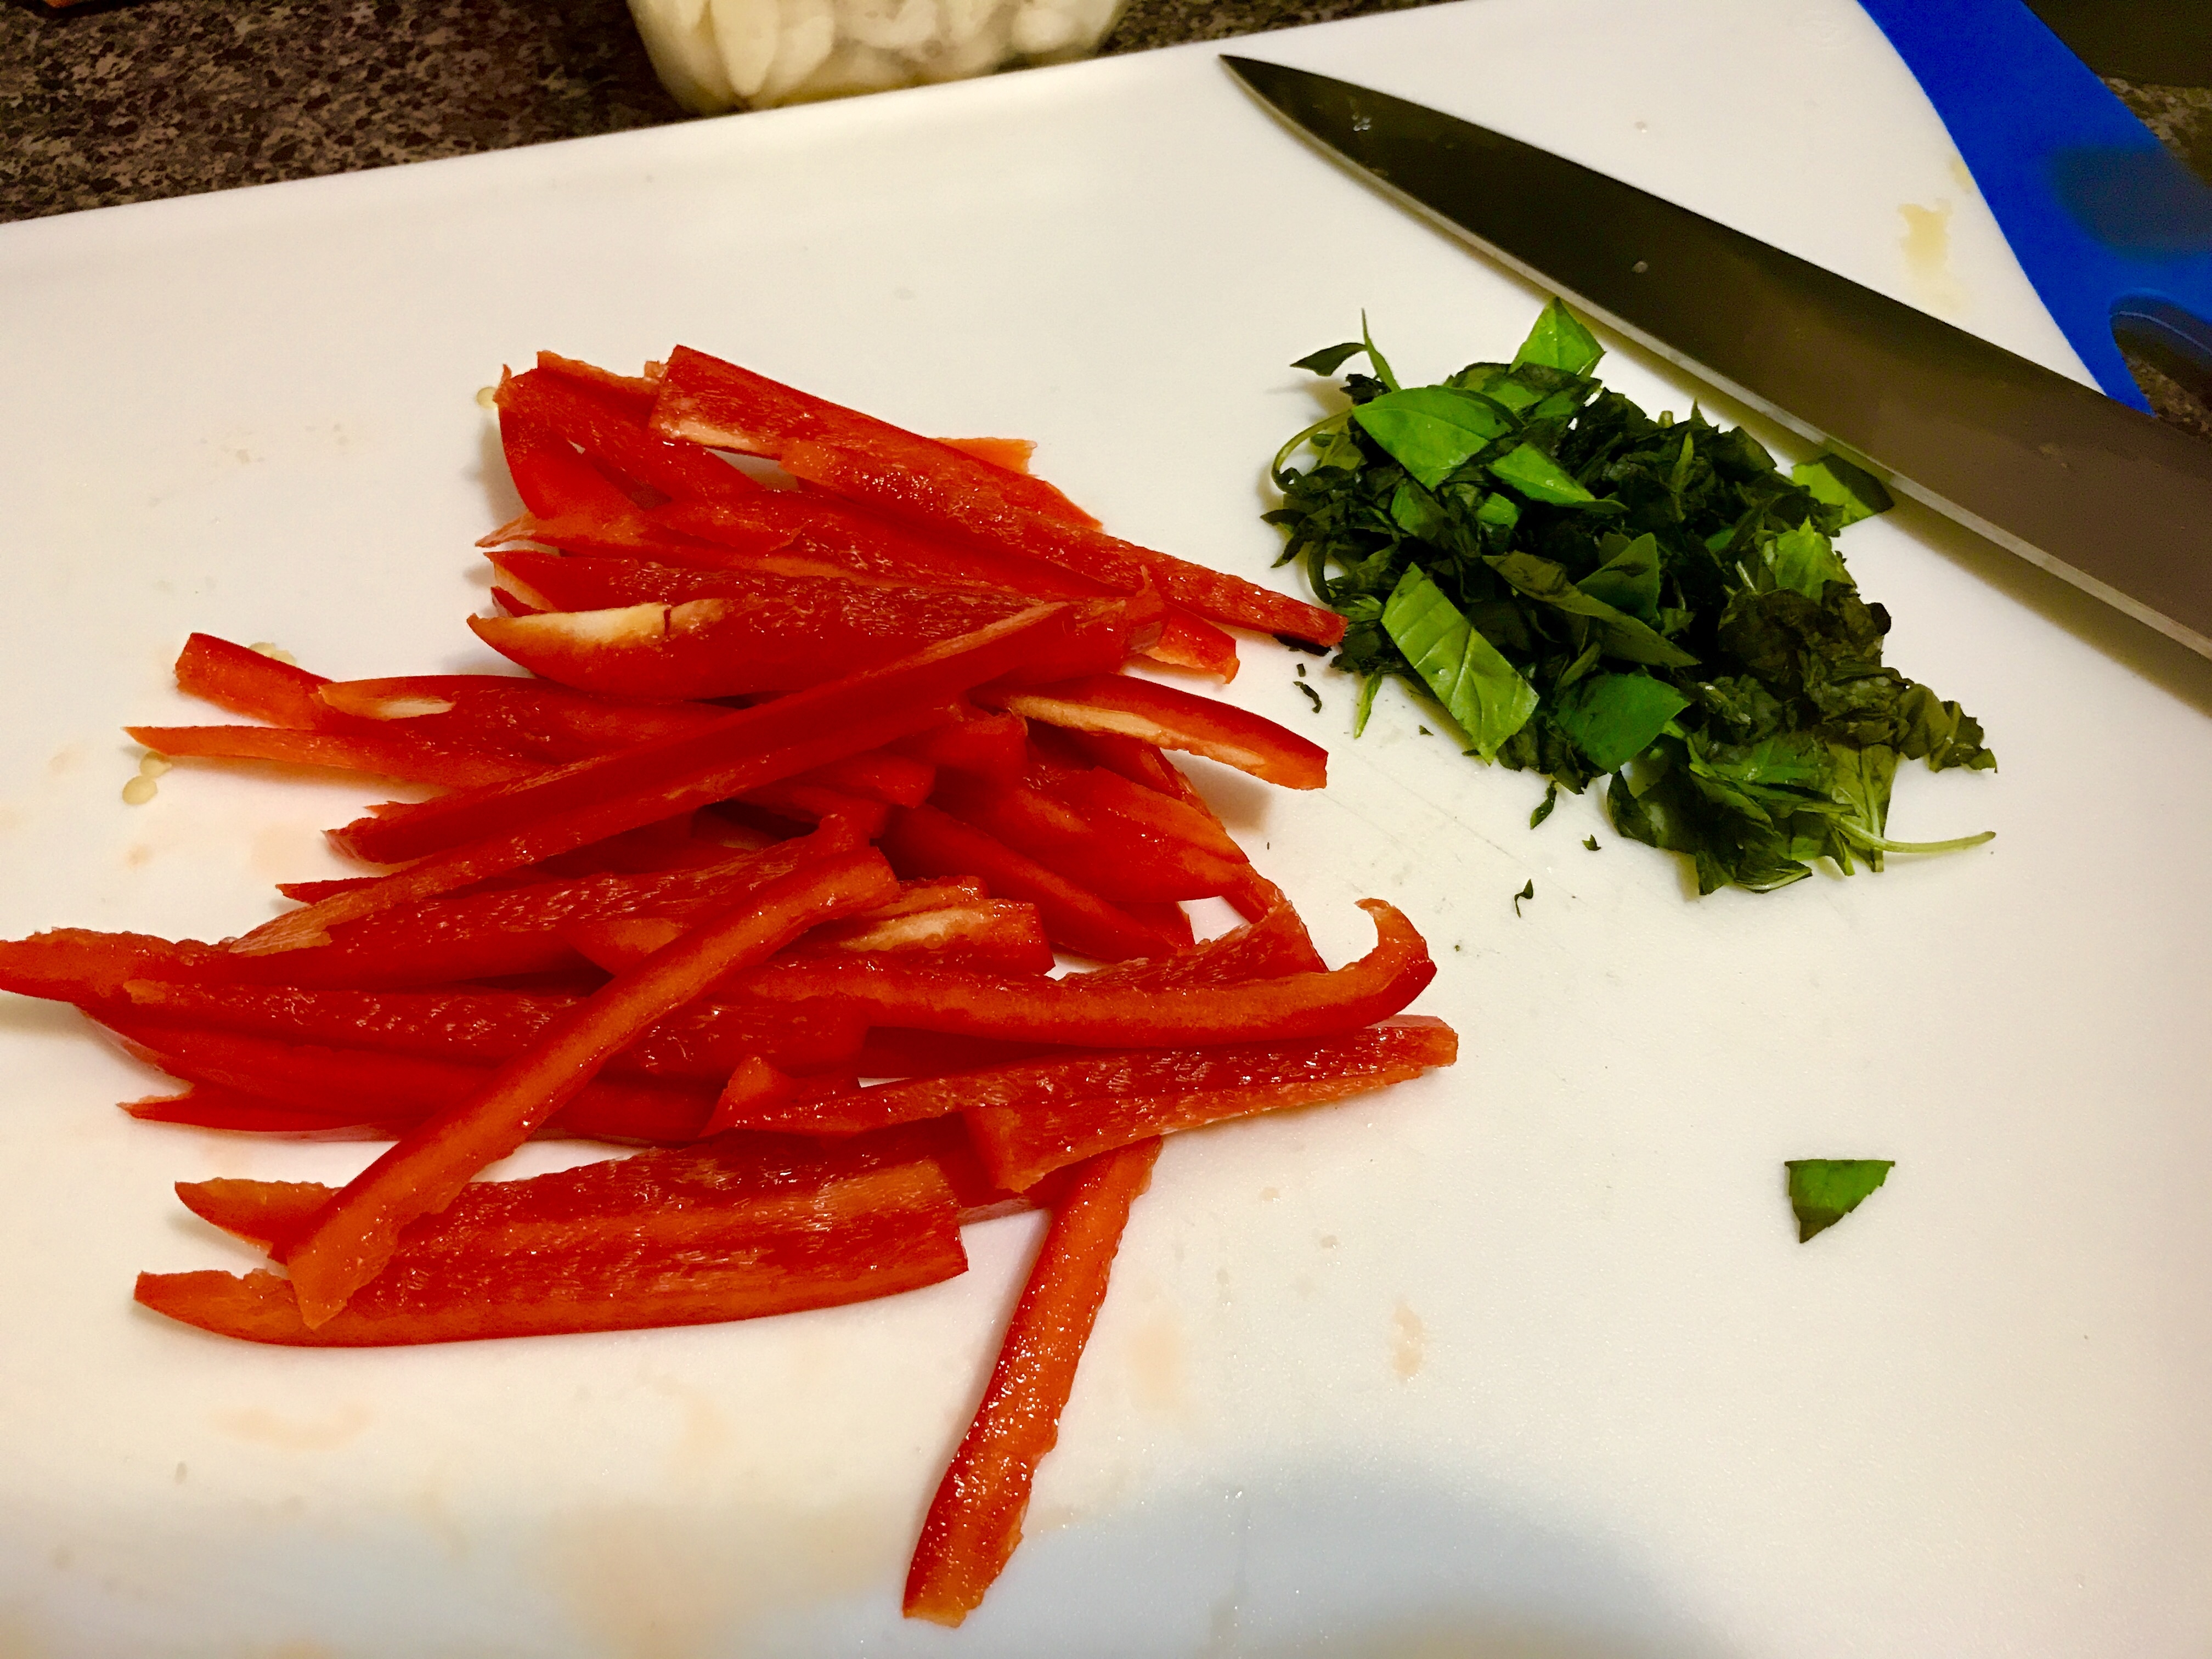 Thinly sliced red bell pepper and chopped baby spinach